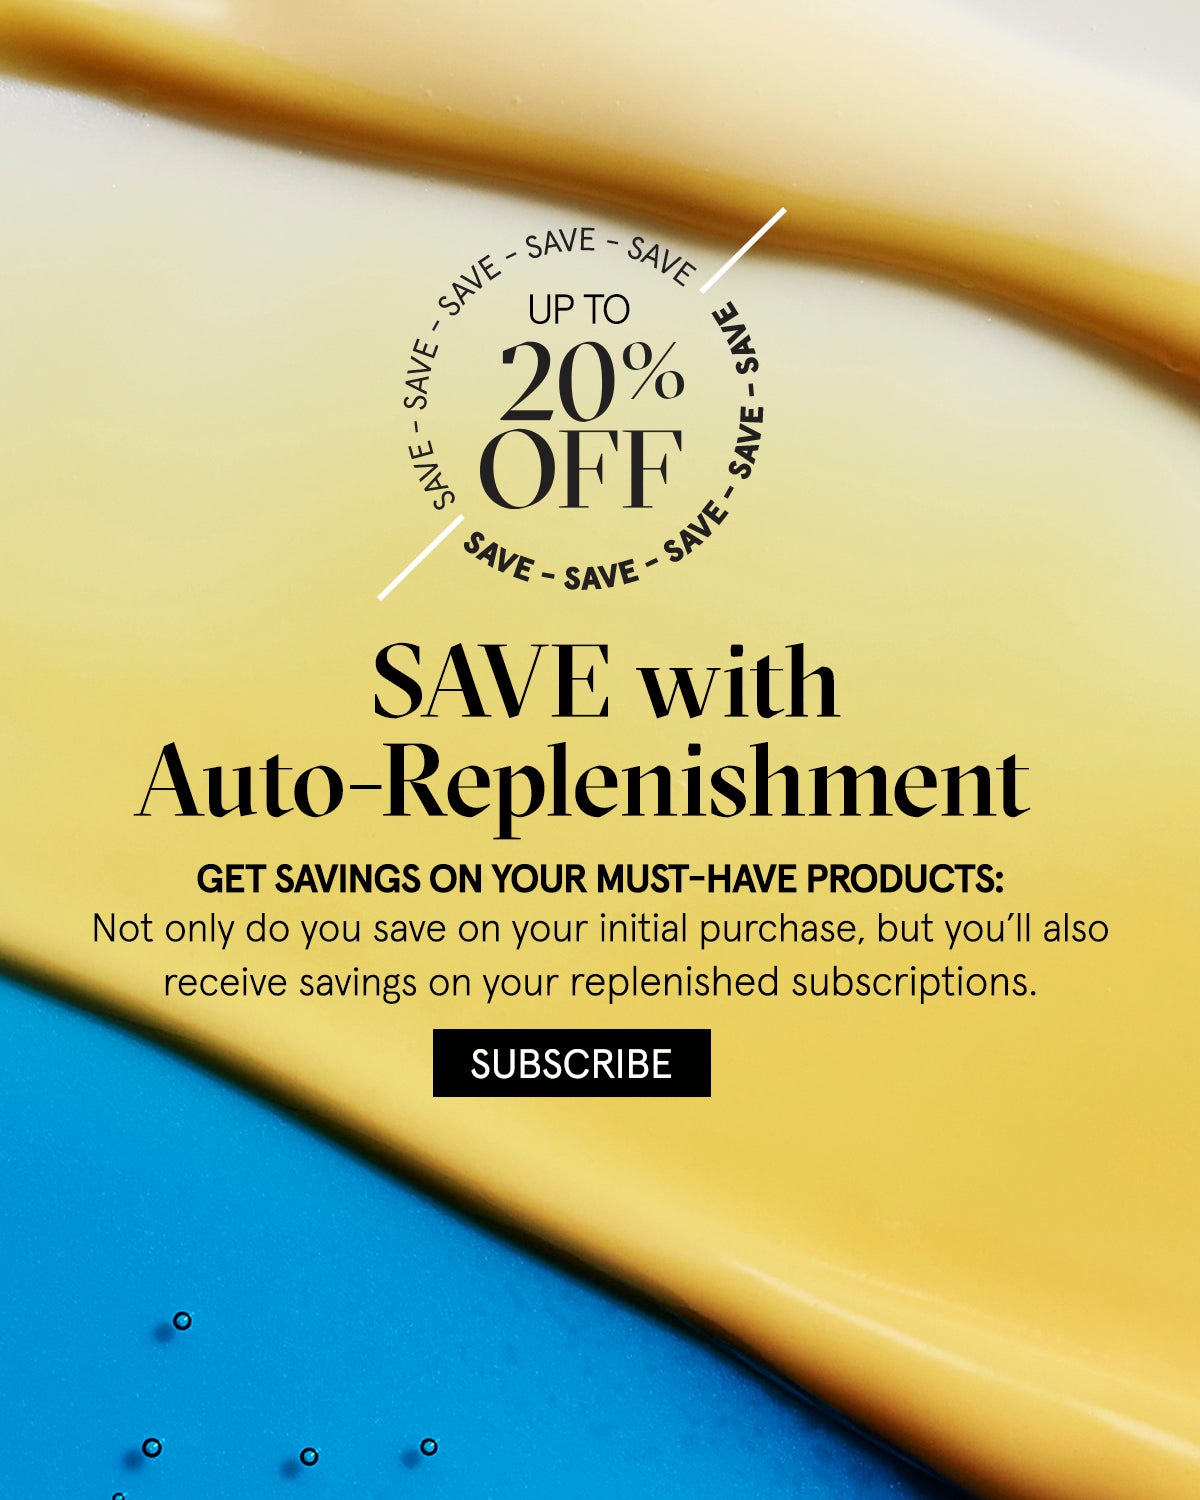 Auto Replenishment. NEVER RUN OUT OF YOUR FAVORITES AGAIN: Save up to 20% when you schedule your must-haves. SUBSCRIBE